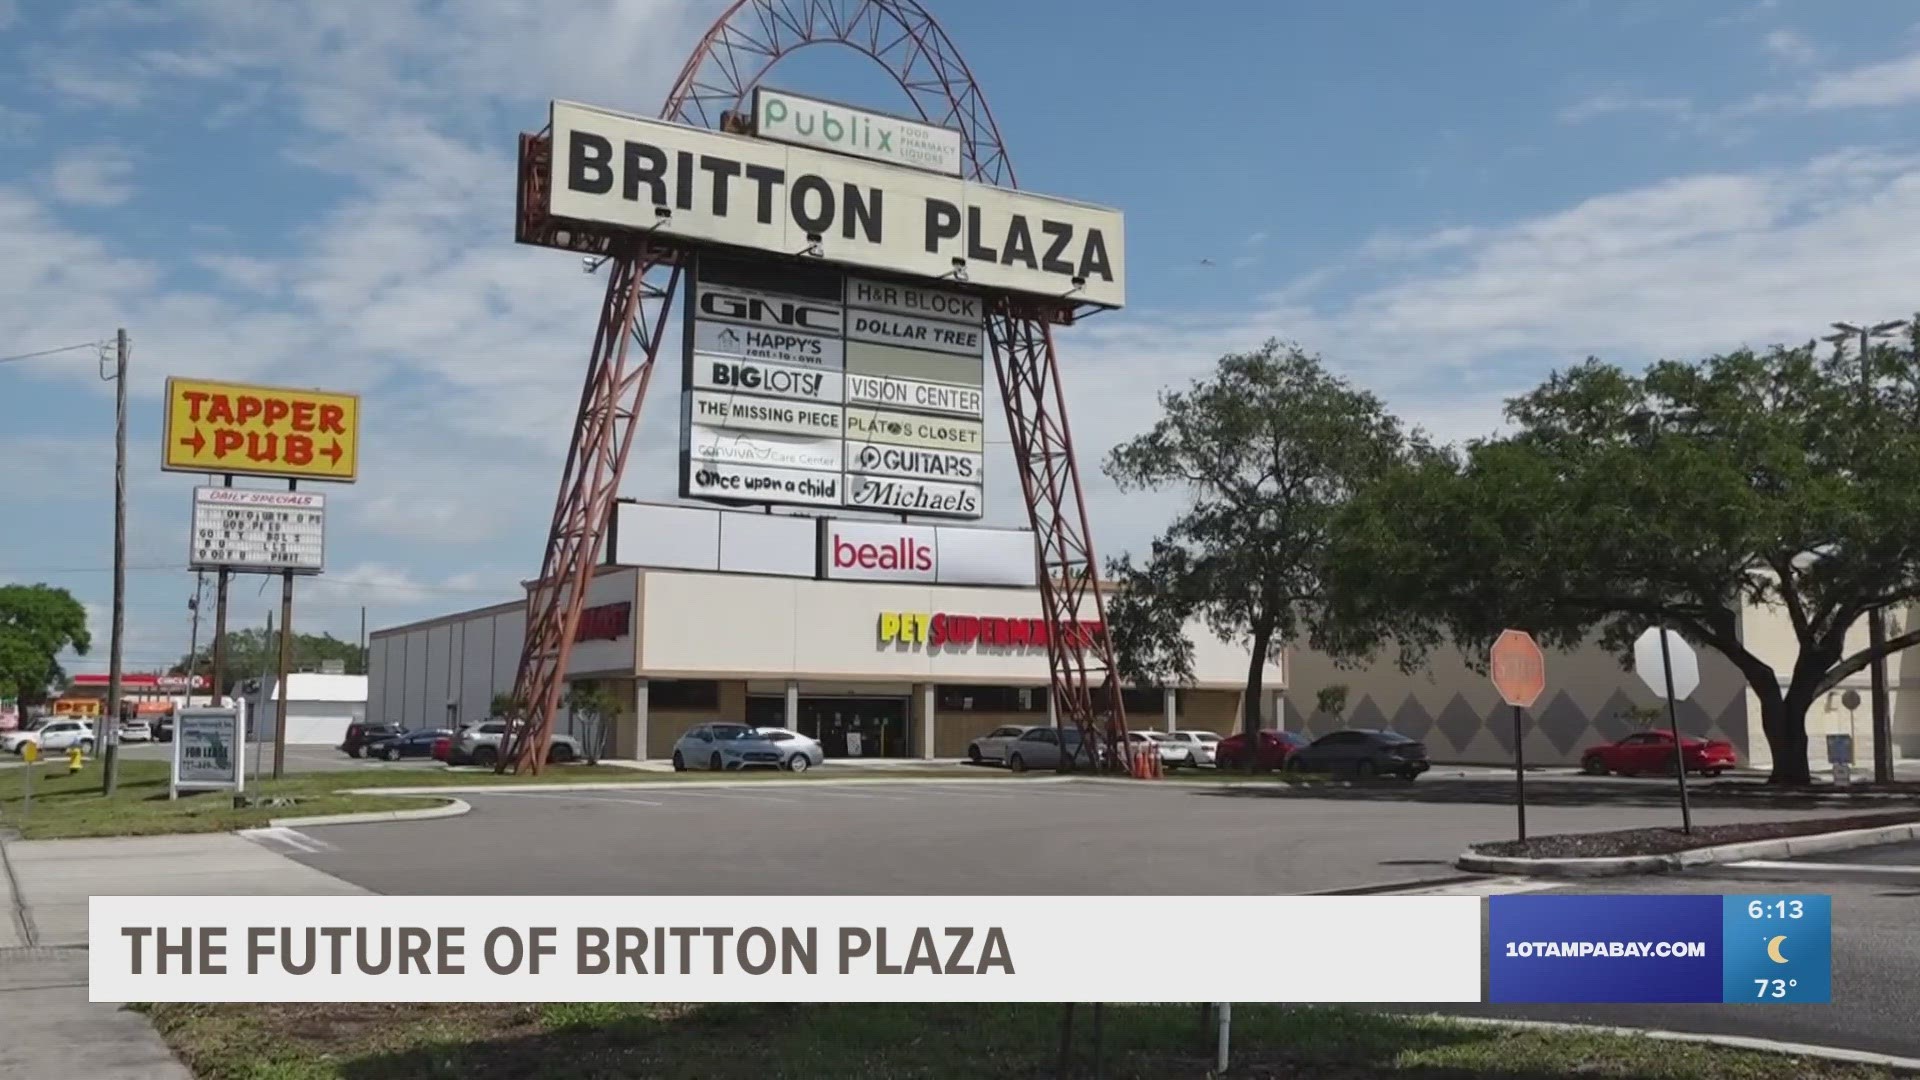 There are reports that after decades of being owned by the same Ohio family, a Miami-based brokerage is about to put Britton Plaza on the market.